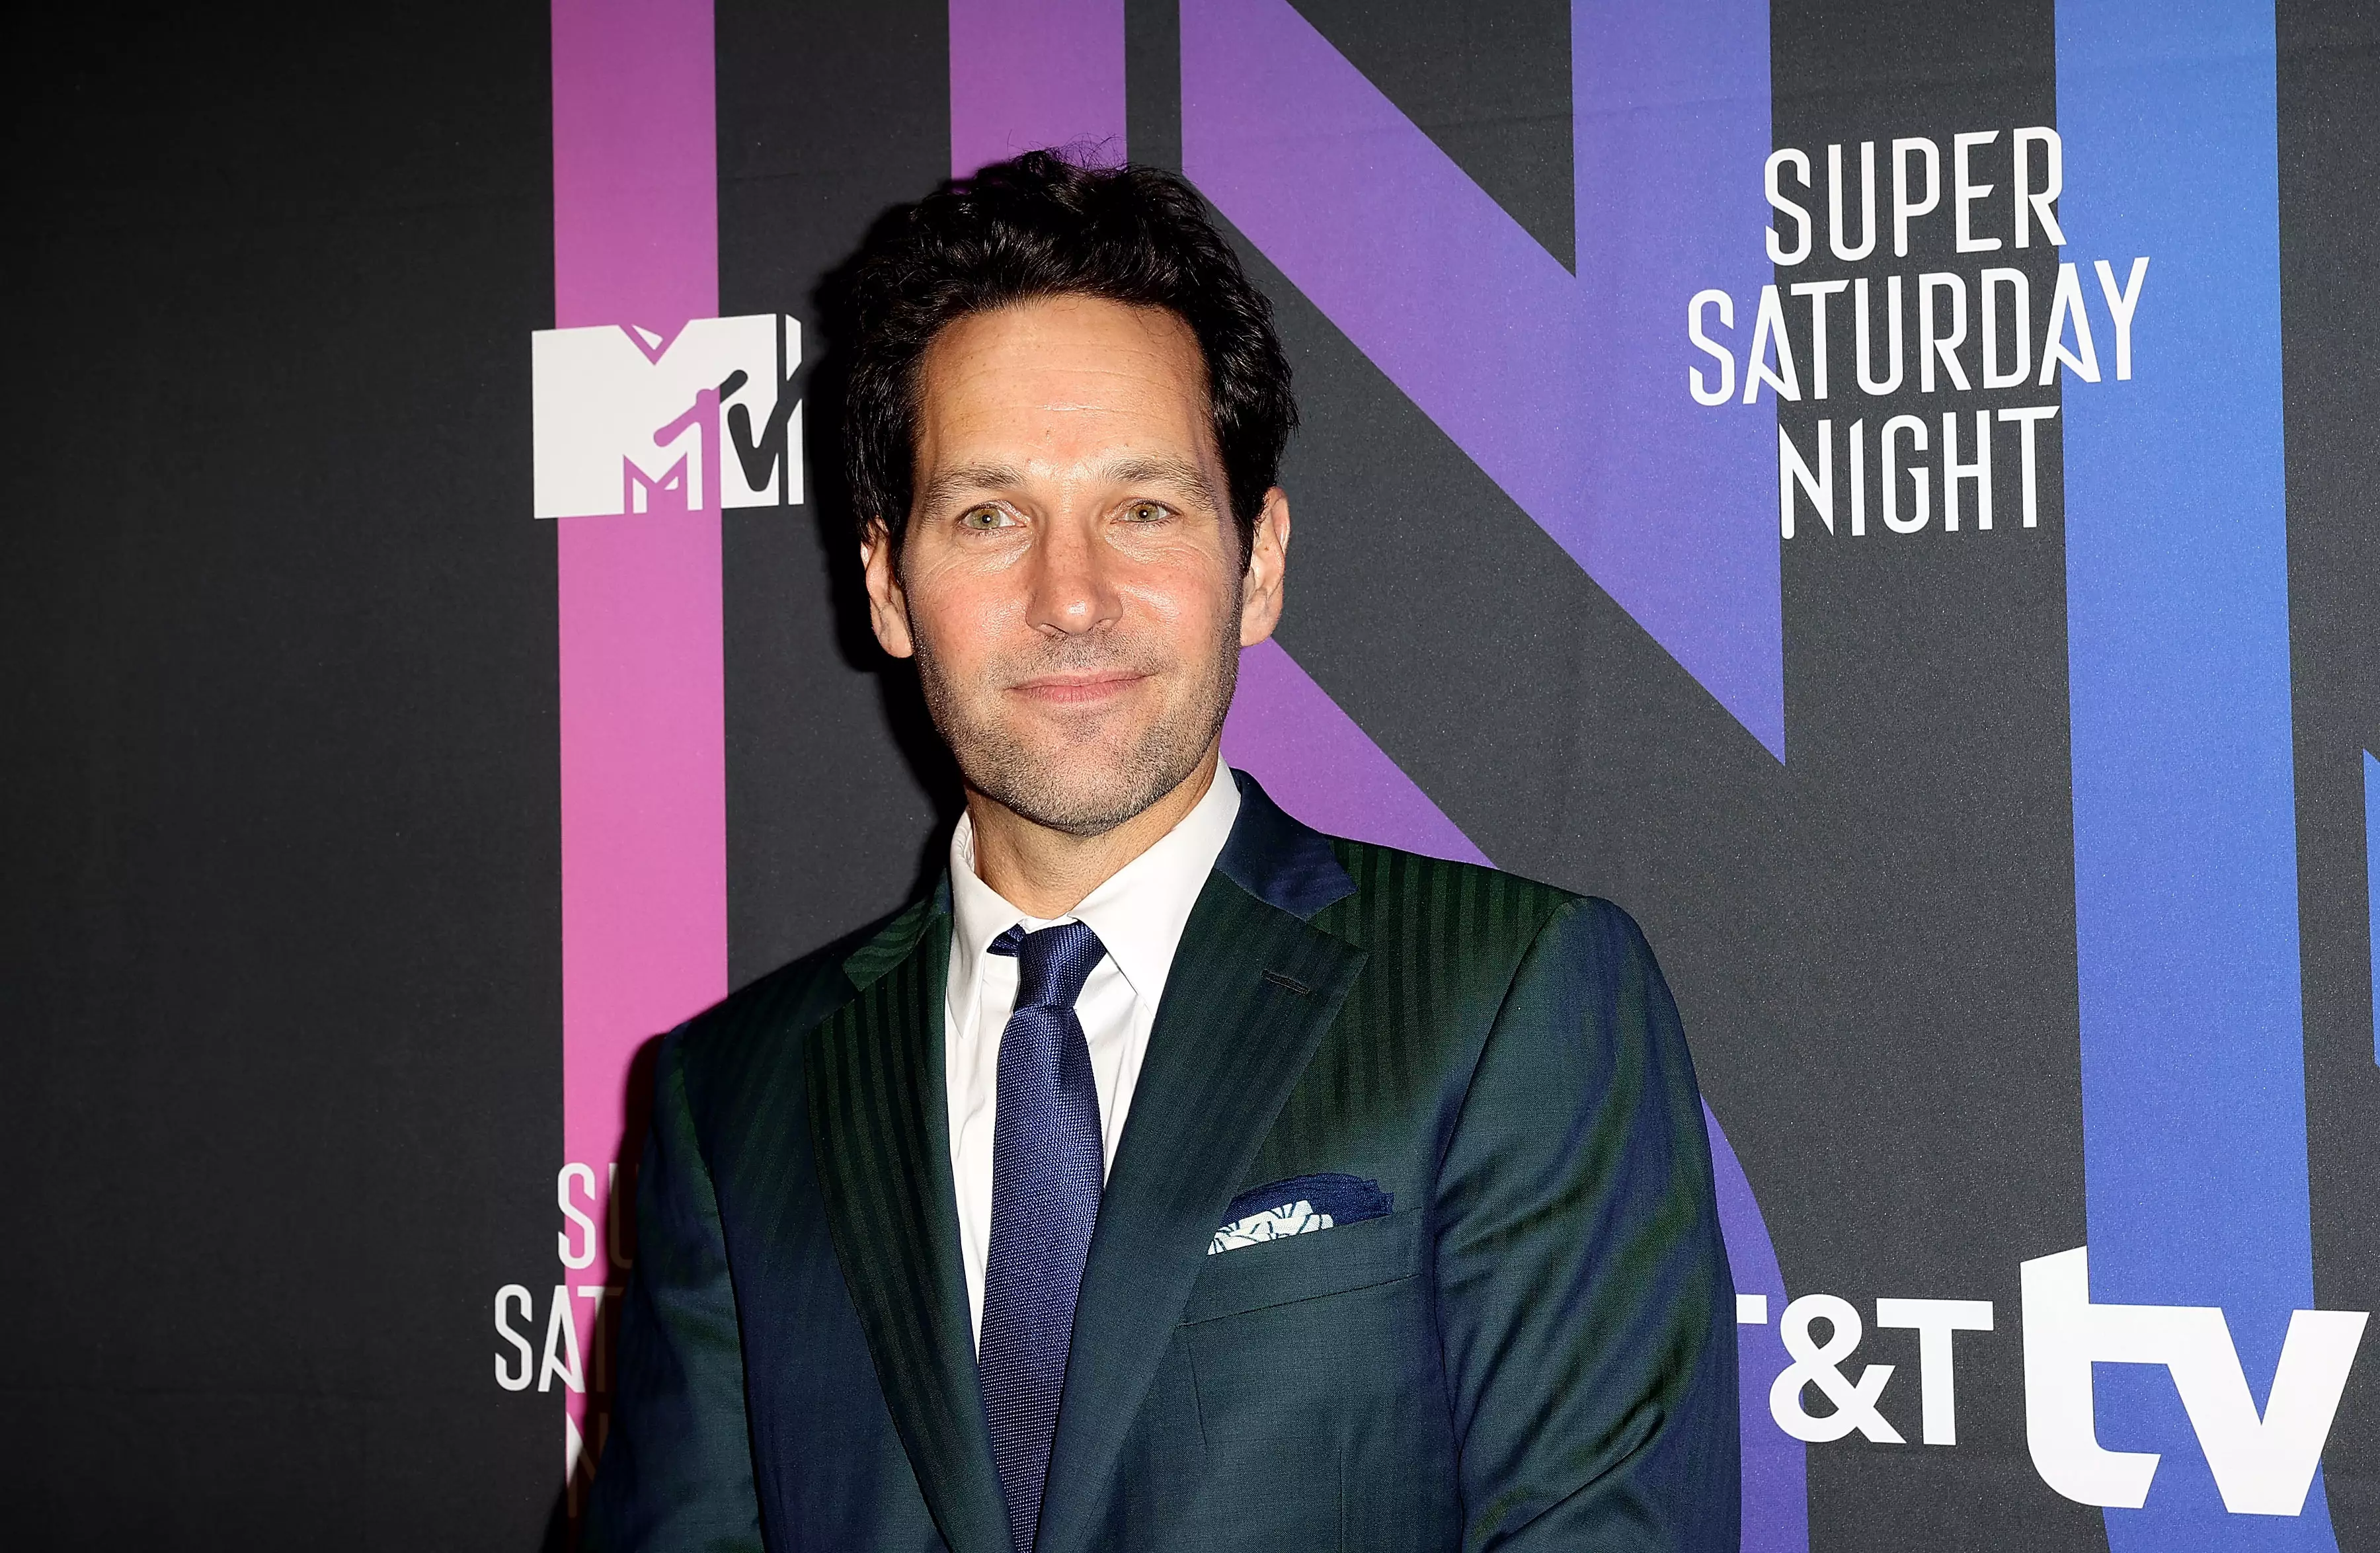 Paul Rudd, who played Mike in Friends, dated Jennifer Aniston. (